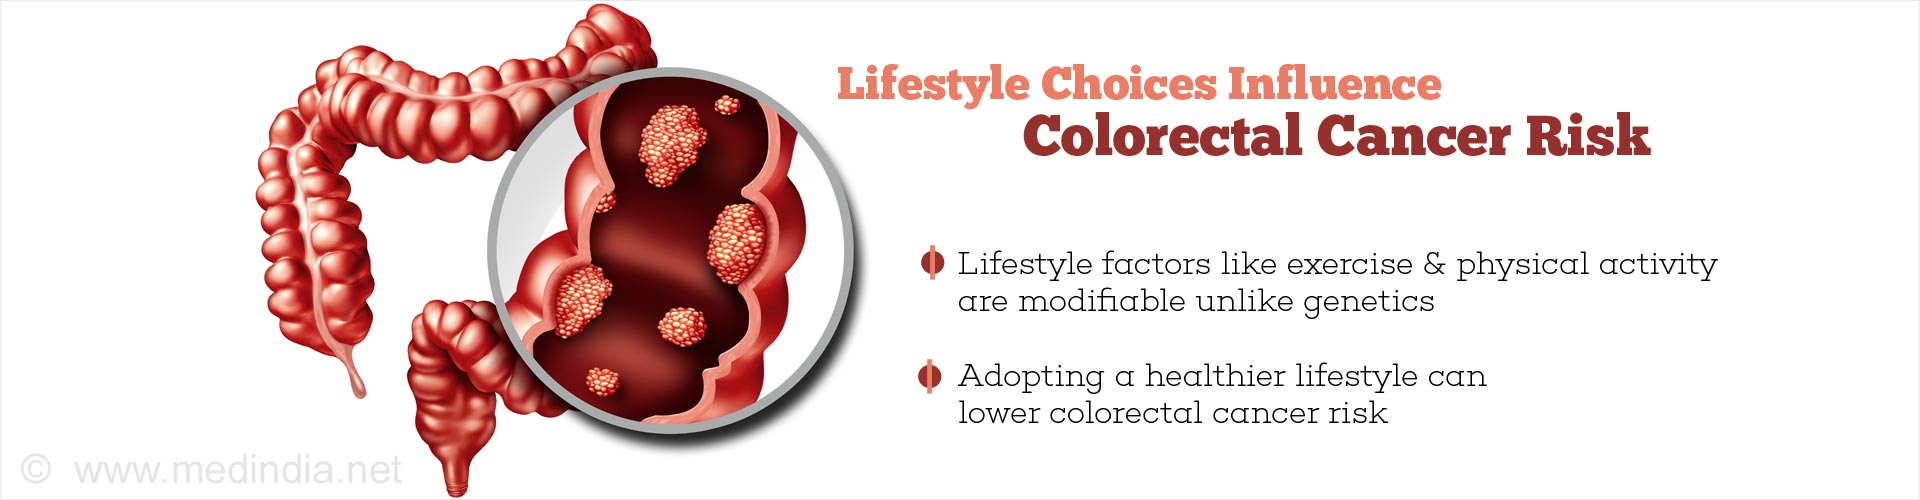 lifestyle choices influence colorectal cancer risk
- lifestyle factors like exercise and physical activity
- adopting a healthier lifestyle can lower colorectal cancer risk